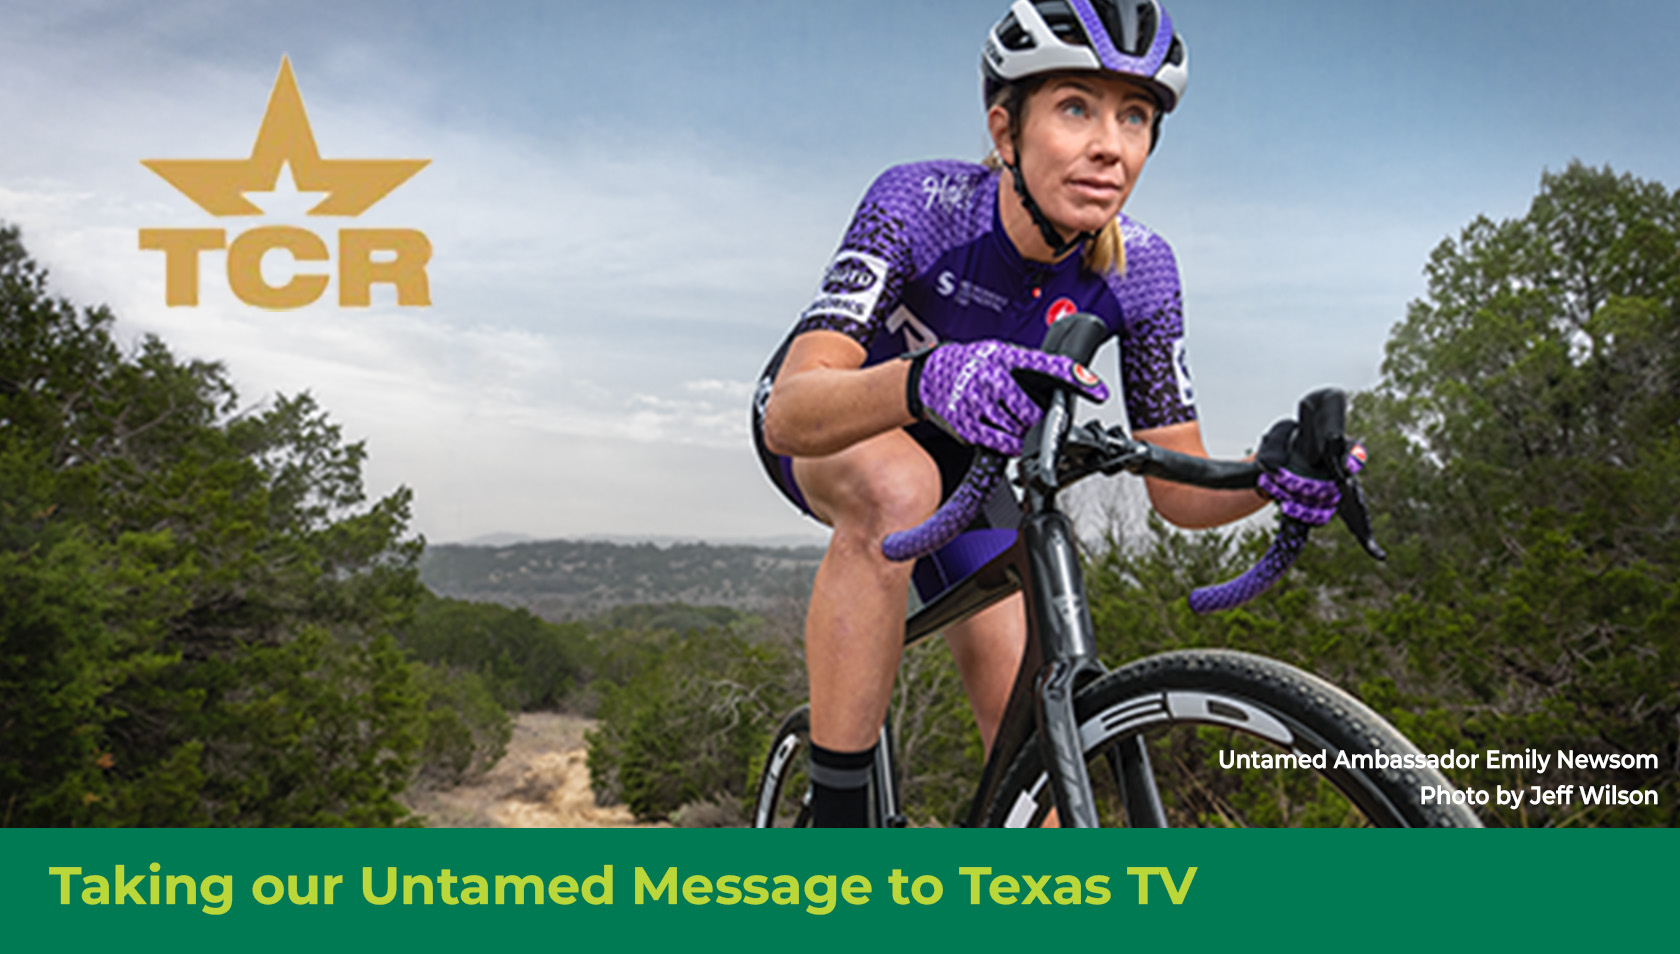 Story #6: Taking our Untamed Message to Texas TV